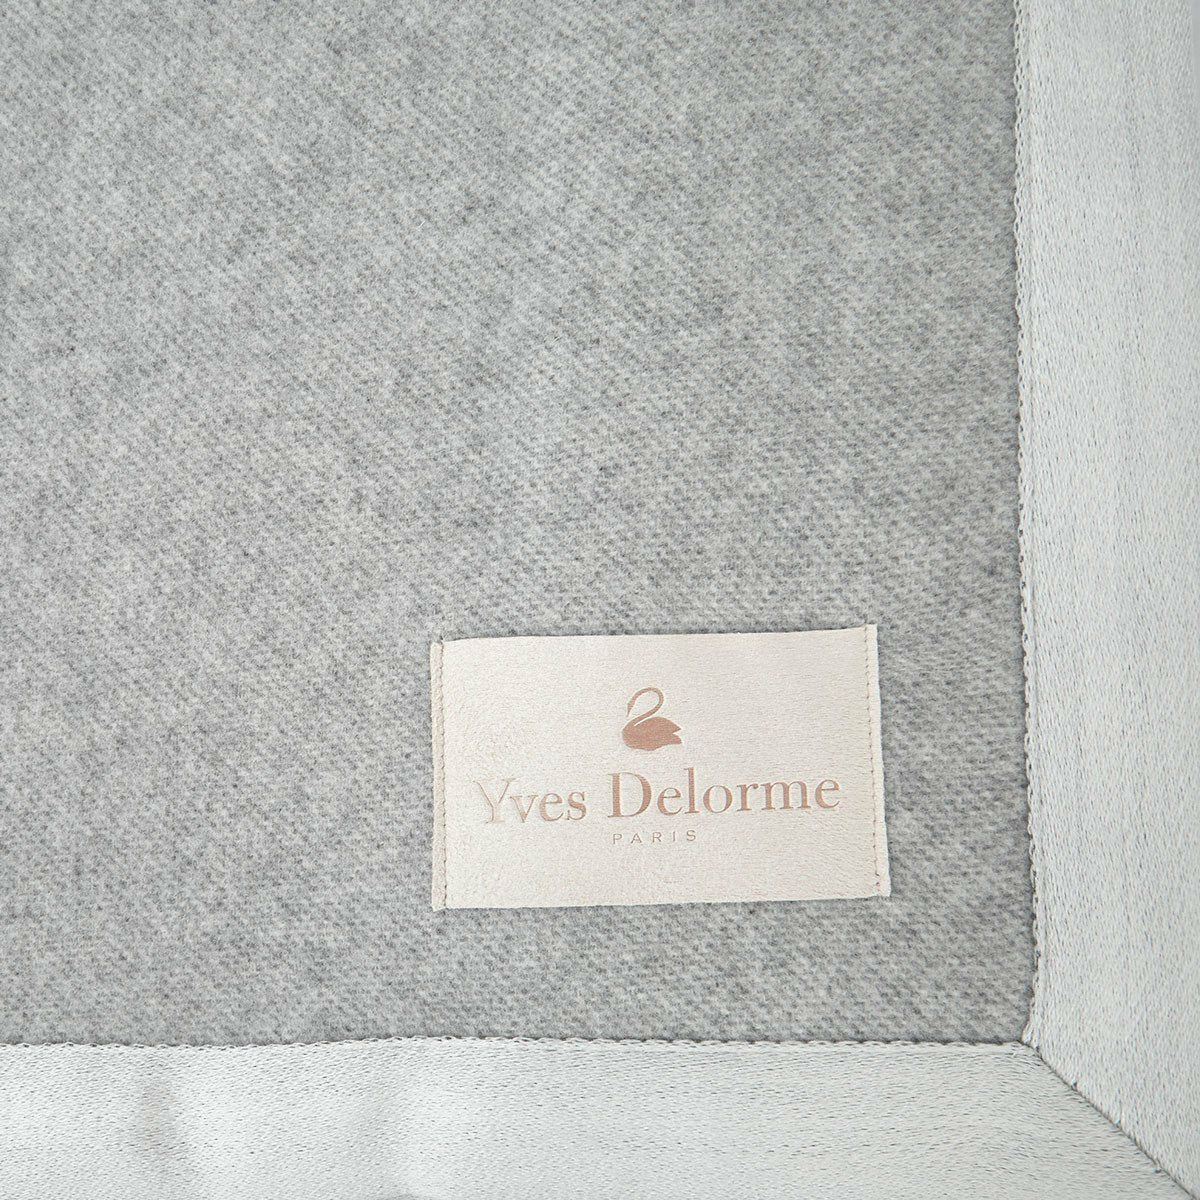 Yves Delorme Nymphe Blanket Swatch Silver Fine Linens